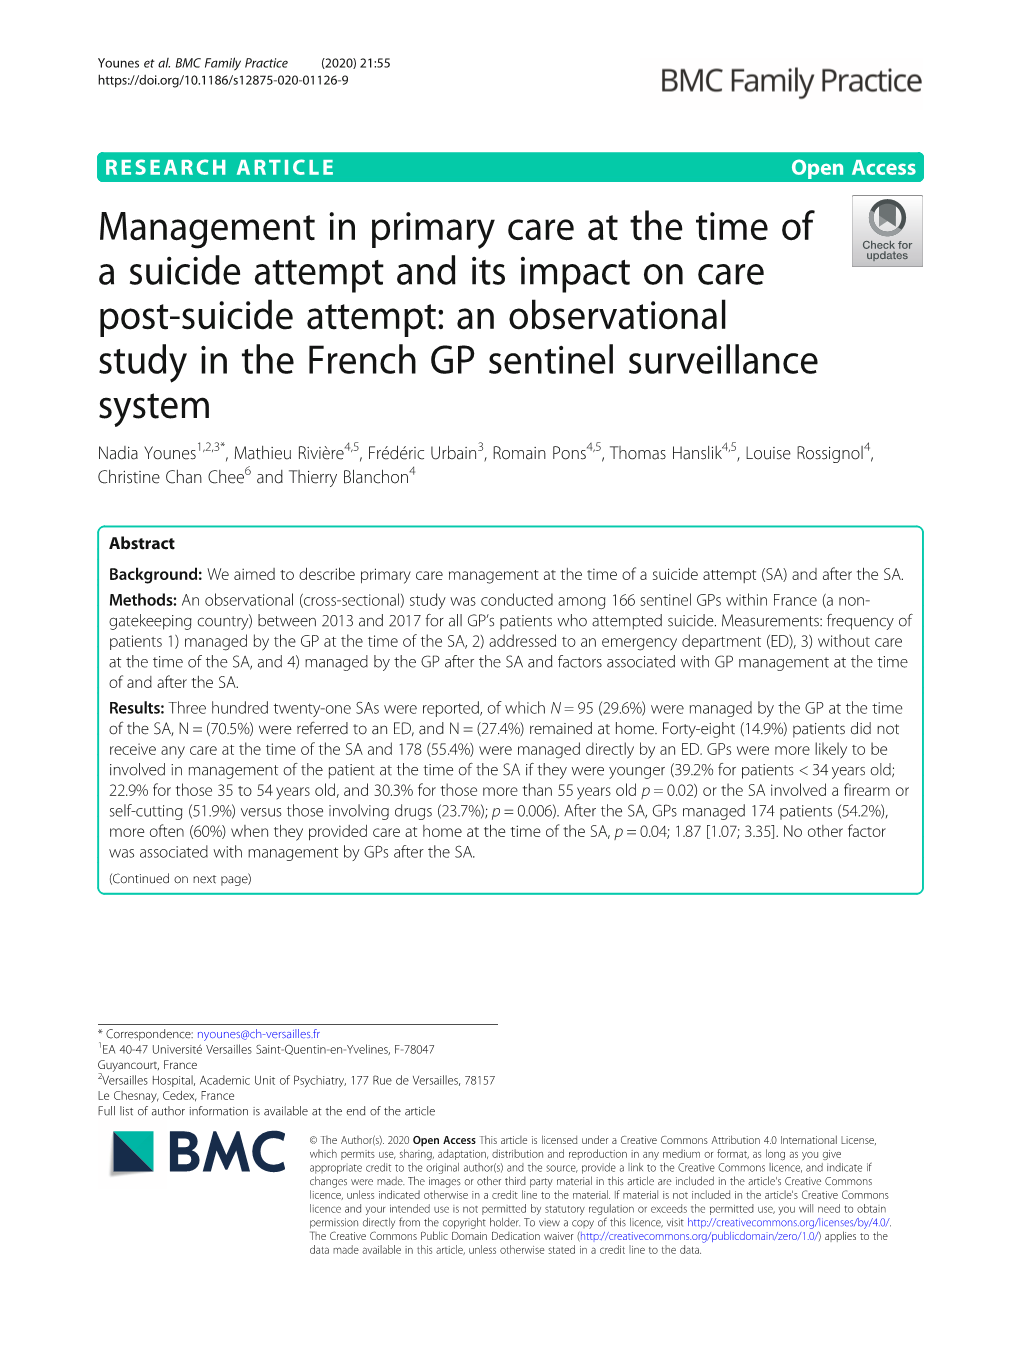 Management in Primary Care at the Time of a Suicide Attempt and Its Impact on Care Post-Suicide Attempt: an Observational Study